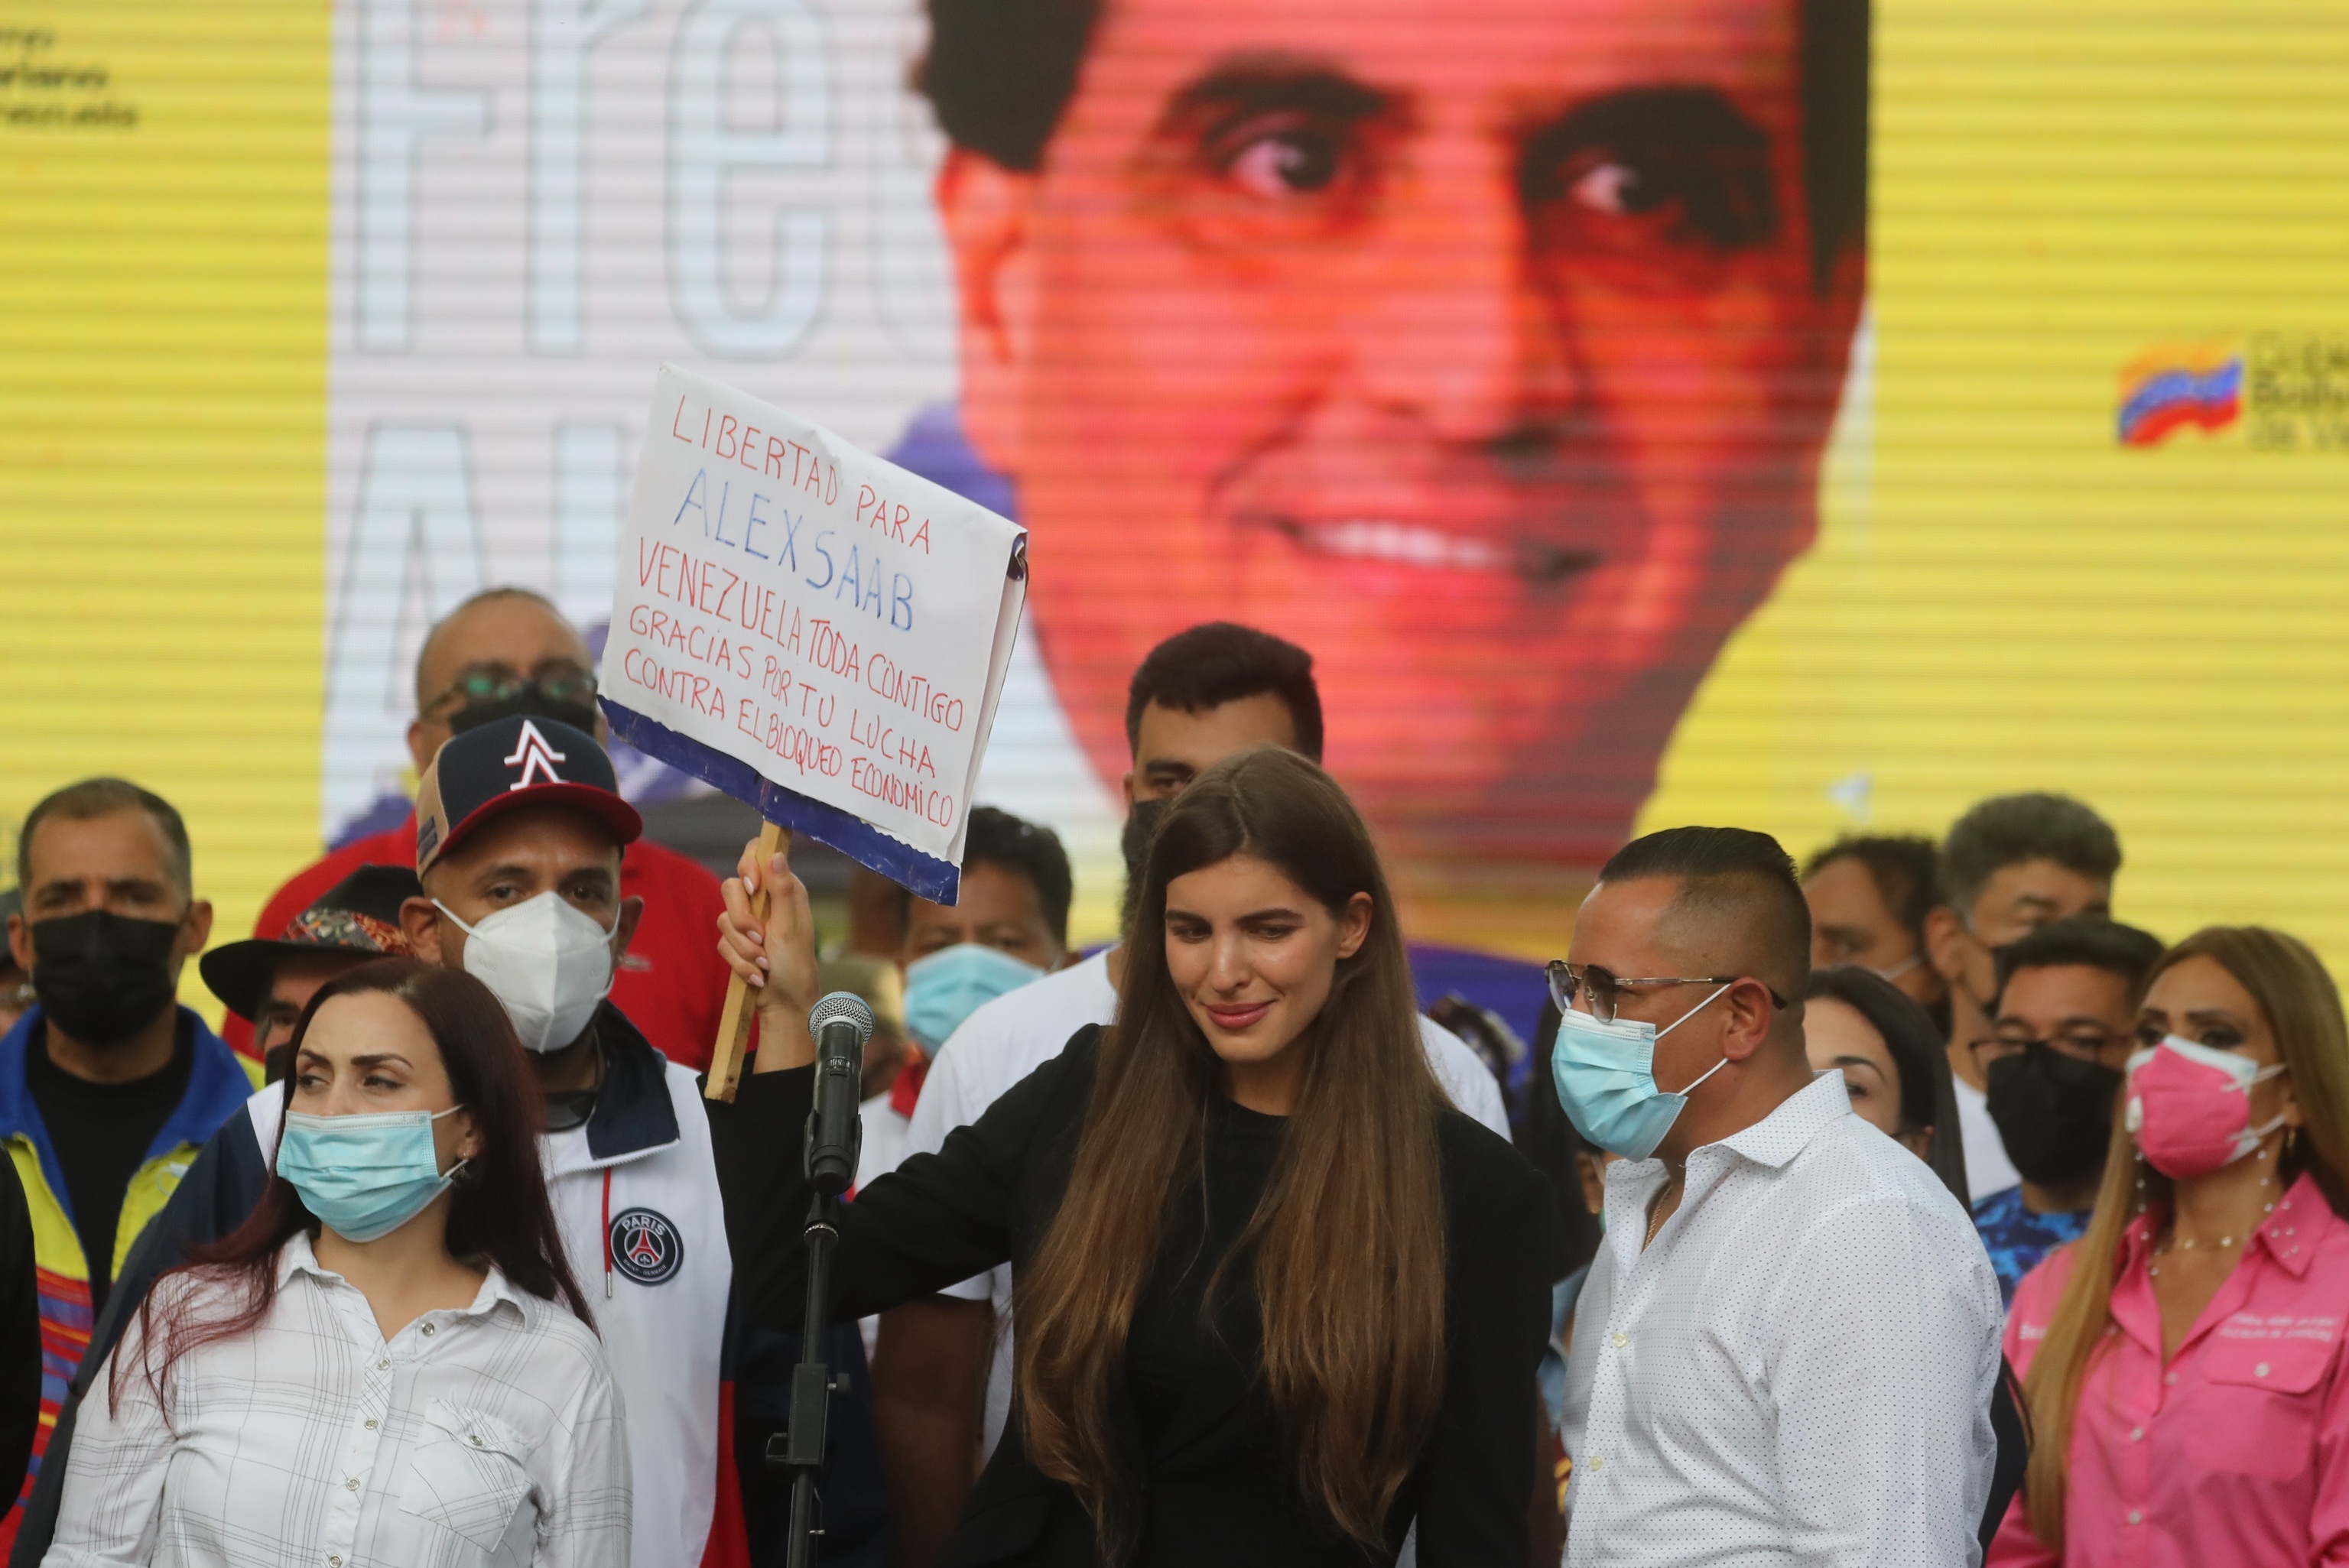 Camila Fabri, Saab's wife, at a demonstration in support of her.